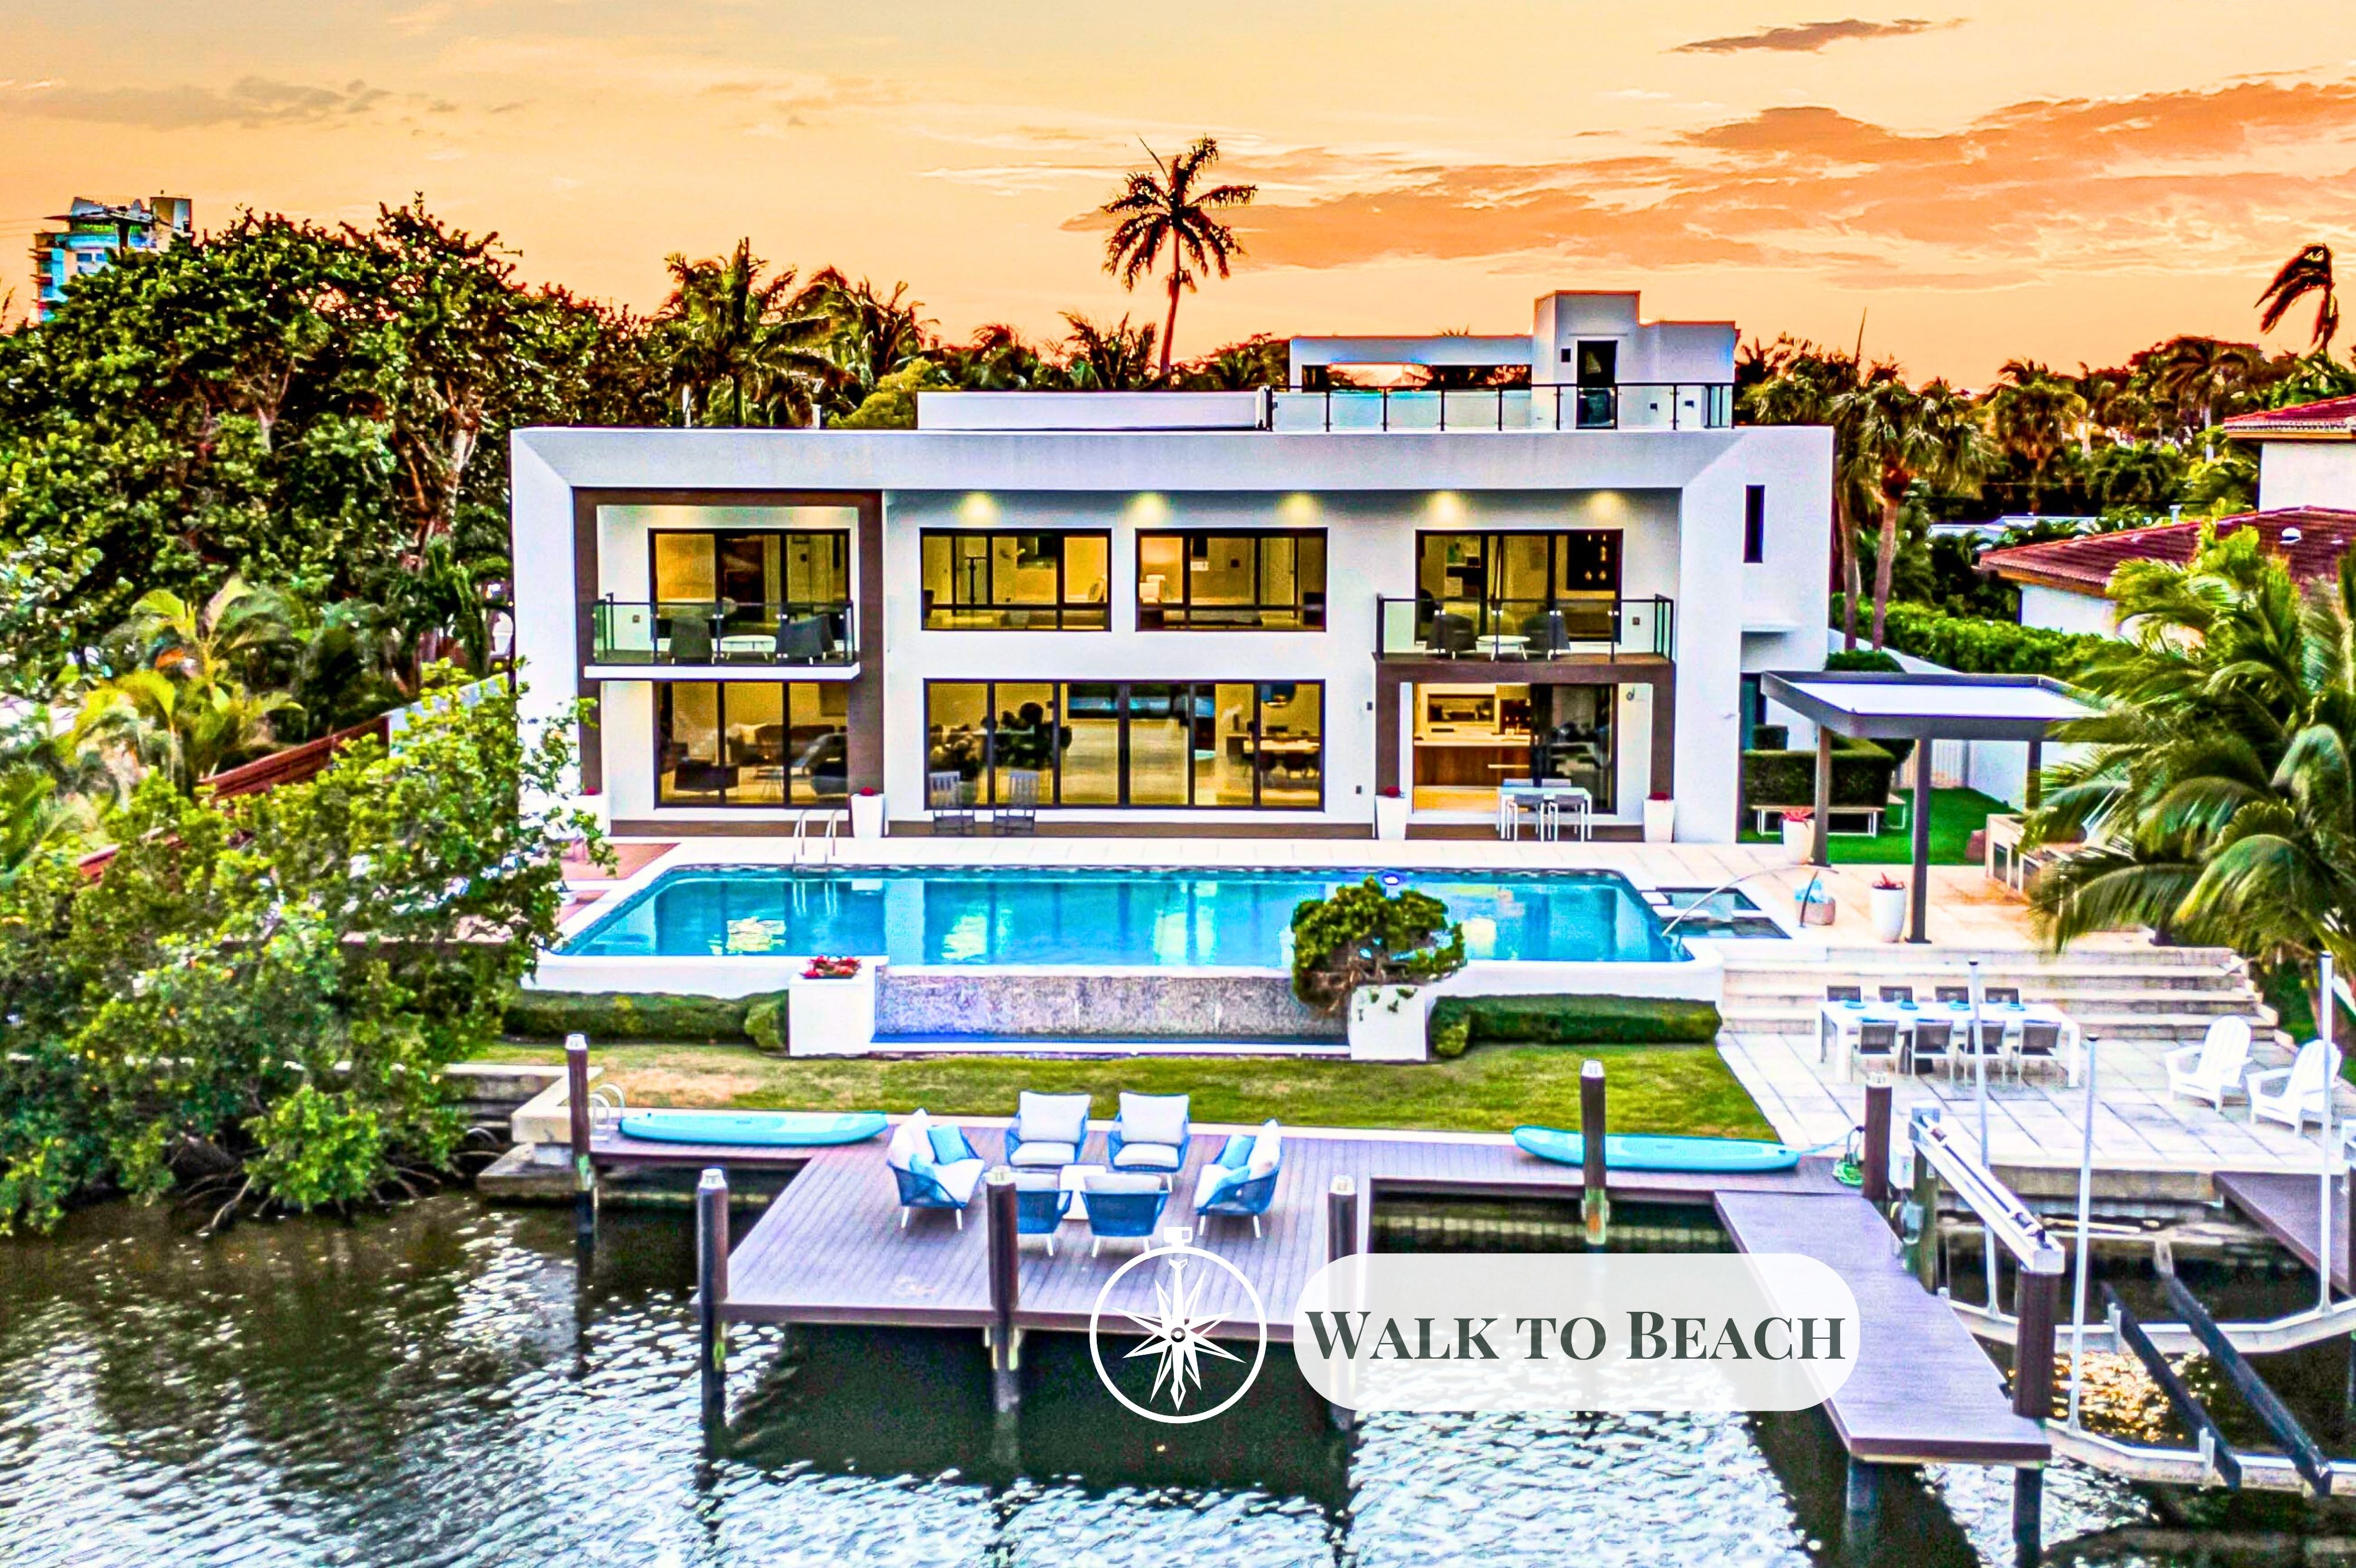 This exquisite waterfront modern villa embodies the quintessence o tranquility and serenity just a short 10 min walk to Bahia Mar beach and steps from restaurants.